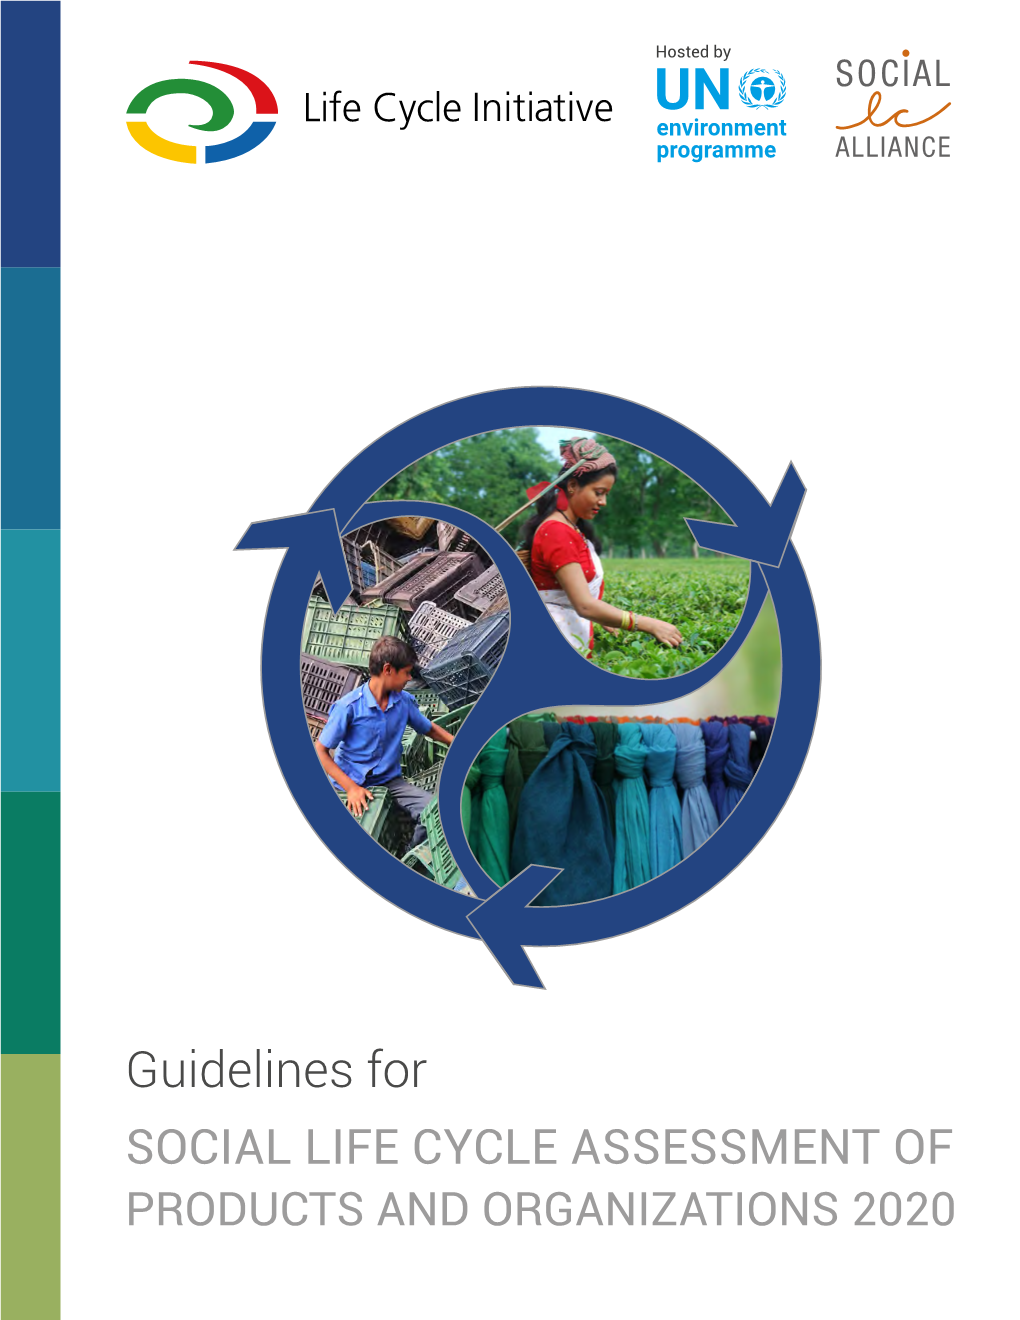 Guidelines for SOCIAL LIFE CYCLE ASSESSMENT of PRODUCTS and ORGANIZATIONS 2020 Copyright © United Nations Environment Programme, 2020